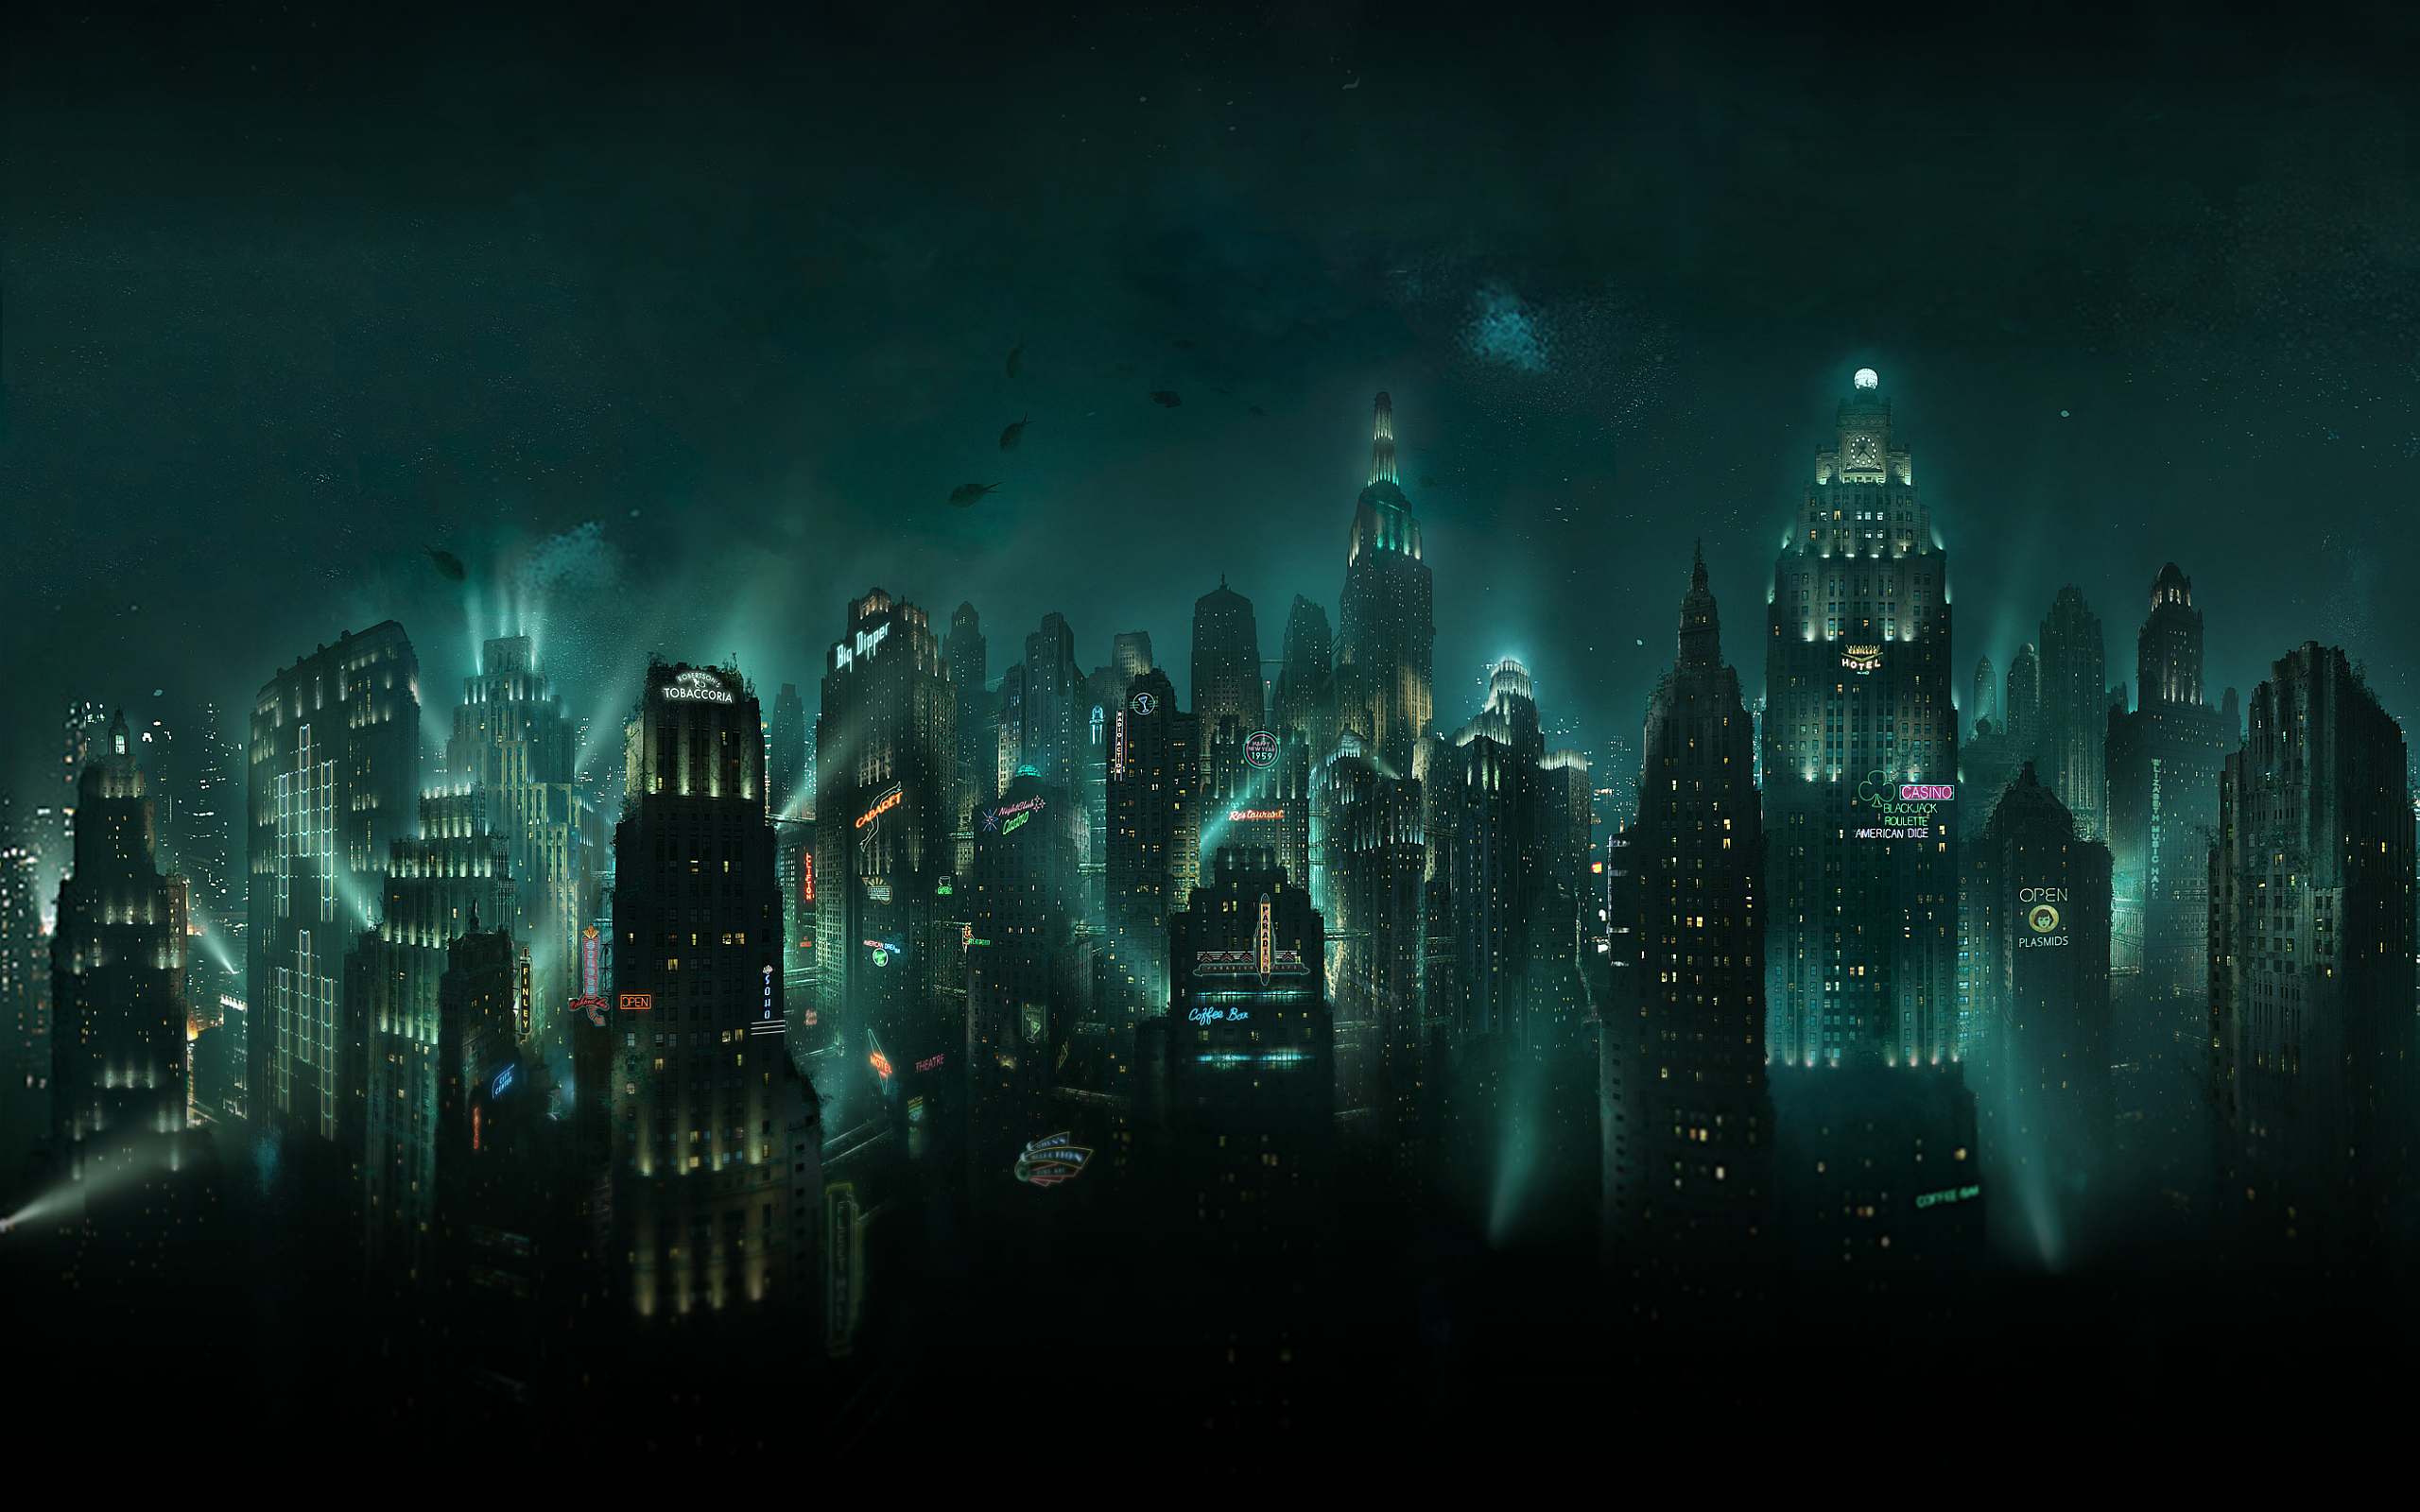 84 Bioshock HD Wallpapers | Backgrounds - Wallpaper Abyss